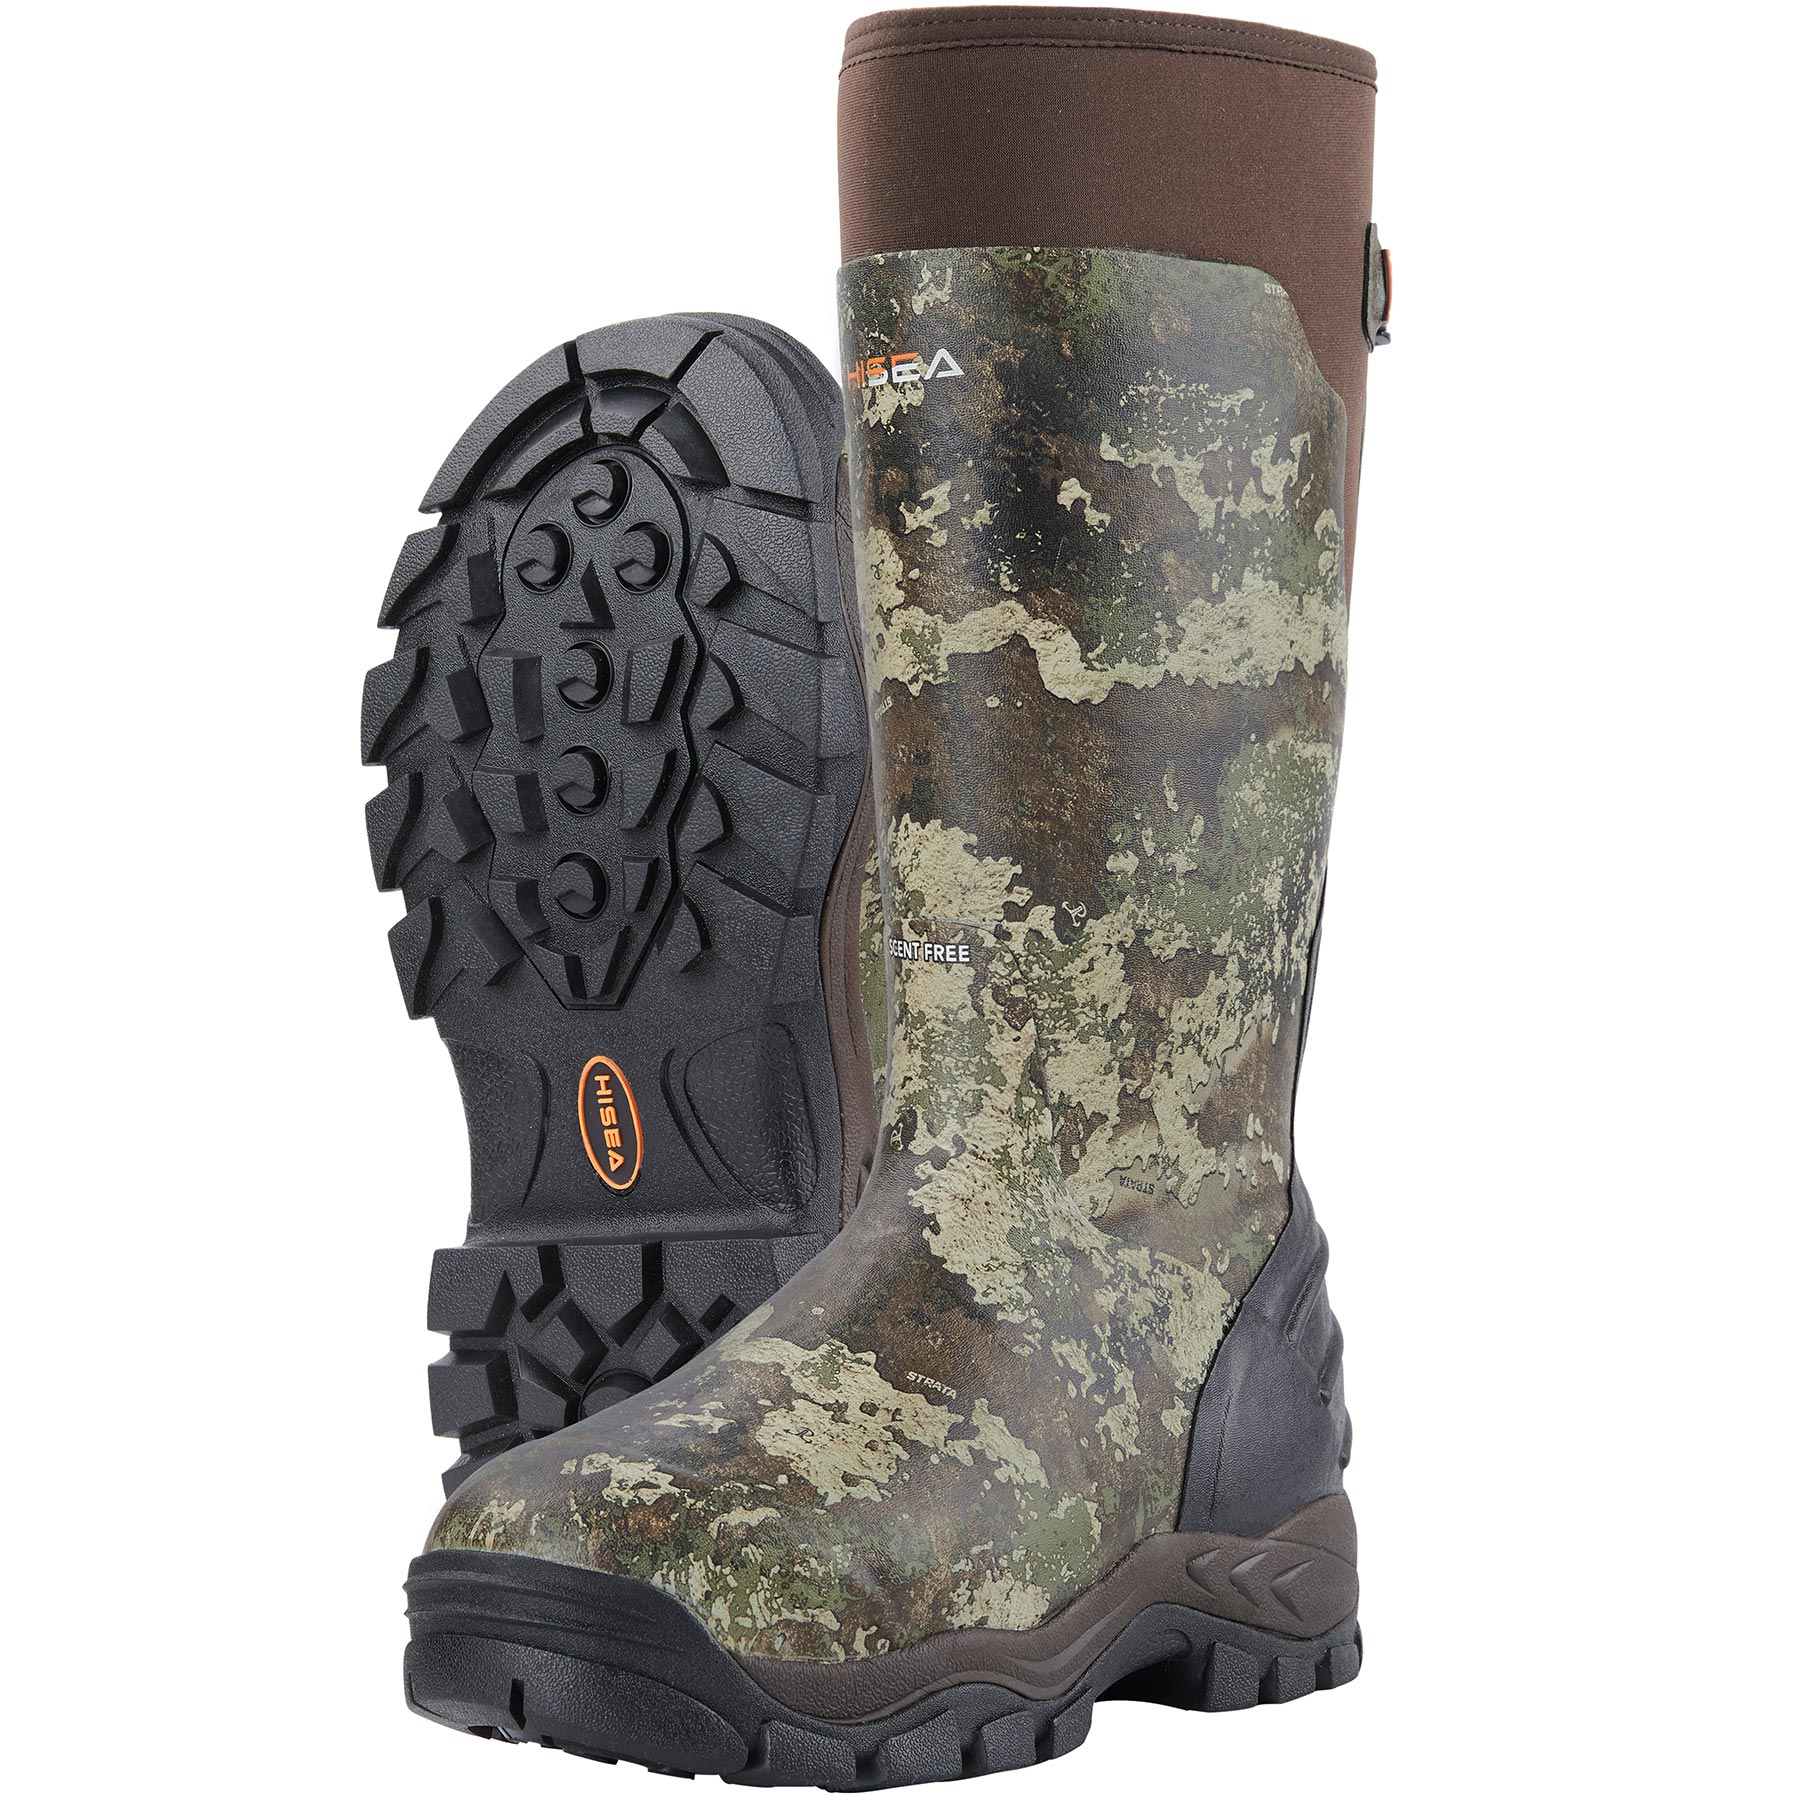 harm protest Chewing gum Apollo Pro 400G Insulated Hunting Boots | HISEA